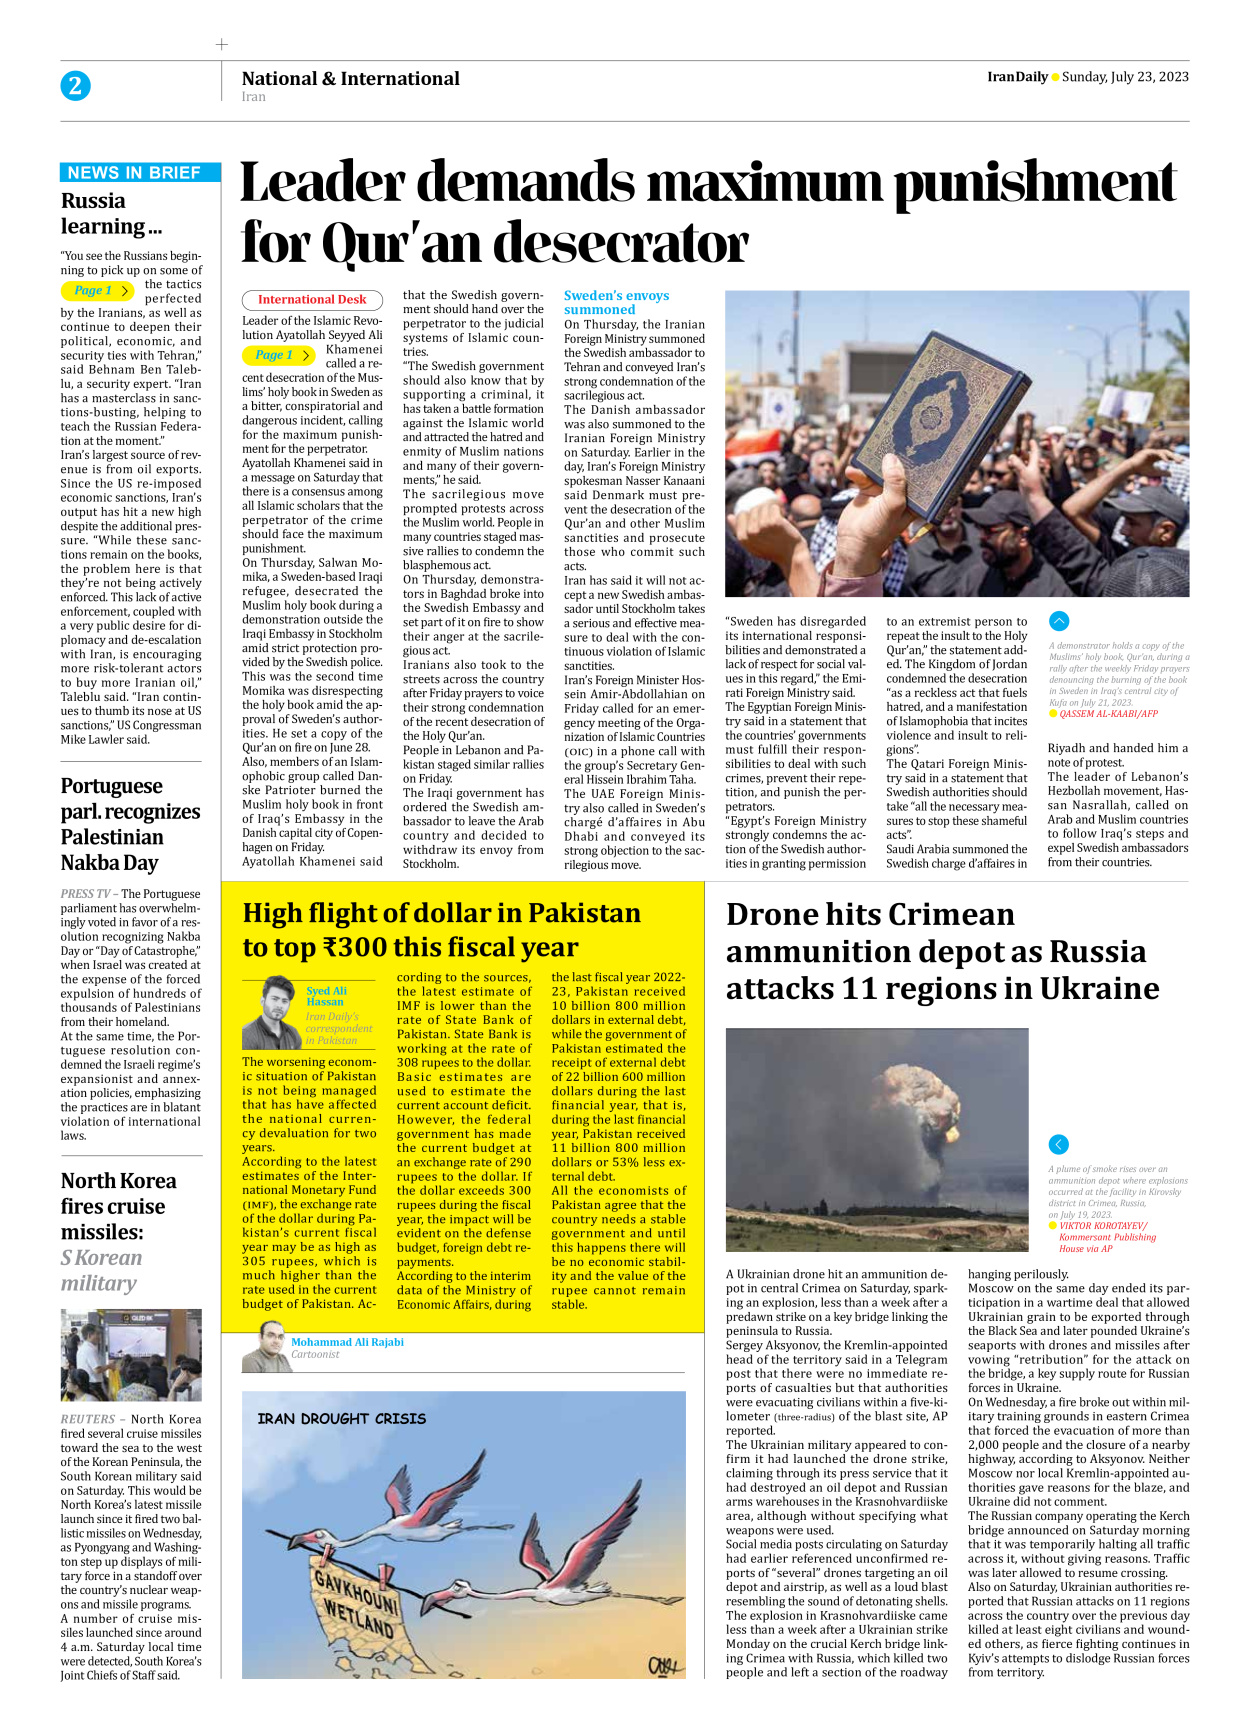 Iran Daily - Number Seven Thousand Three Hundred and Forty Six - 23 July 2023 - Page 2